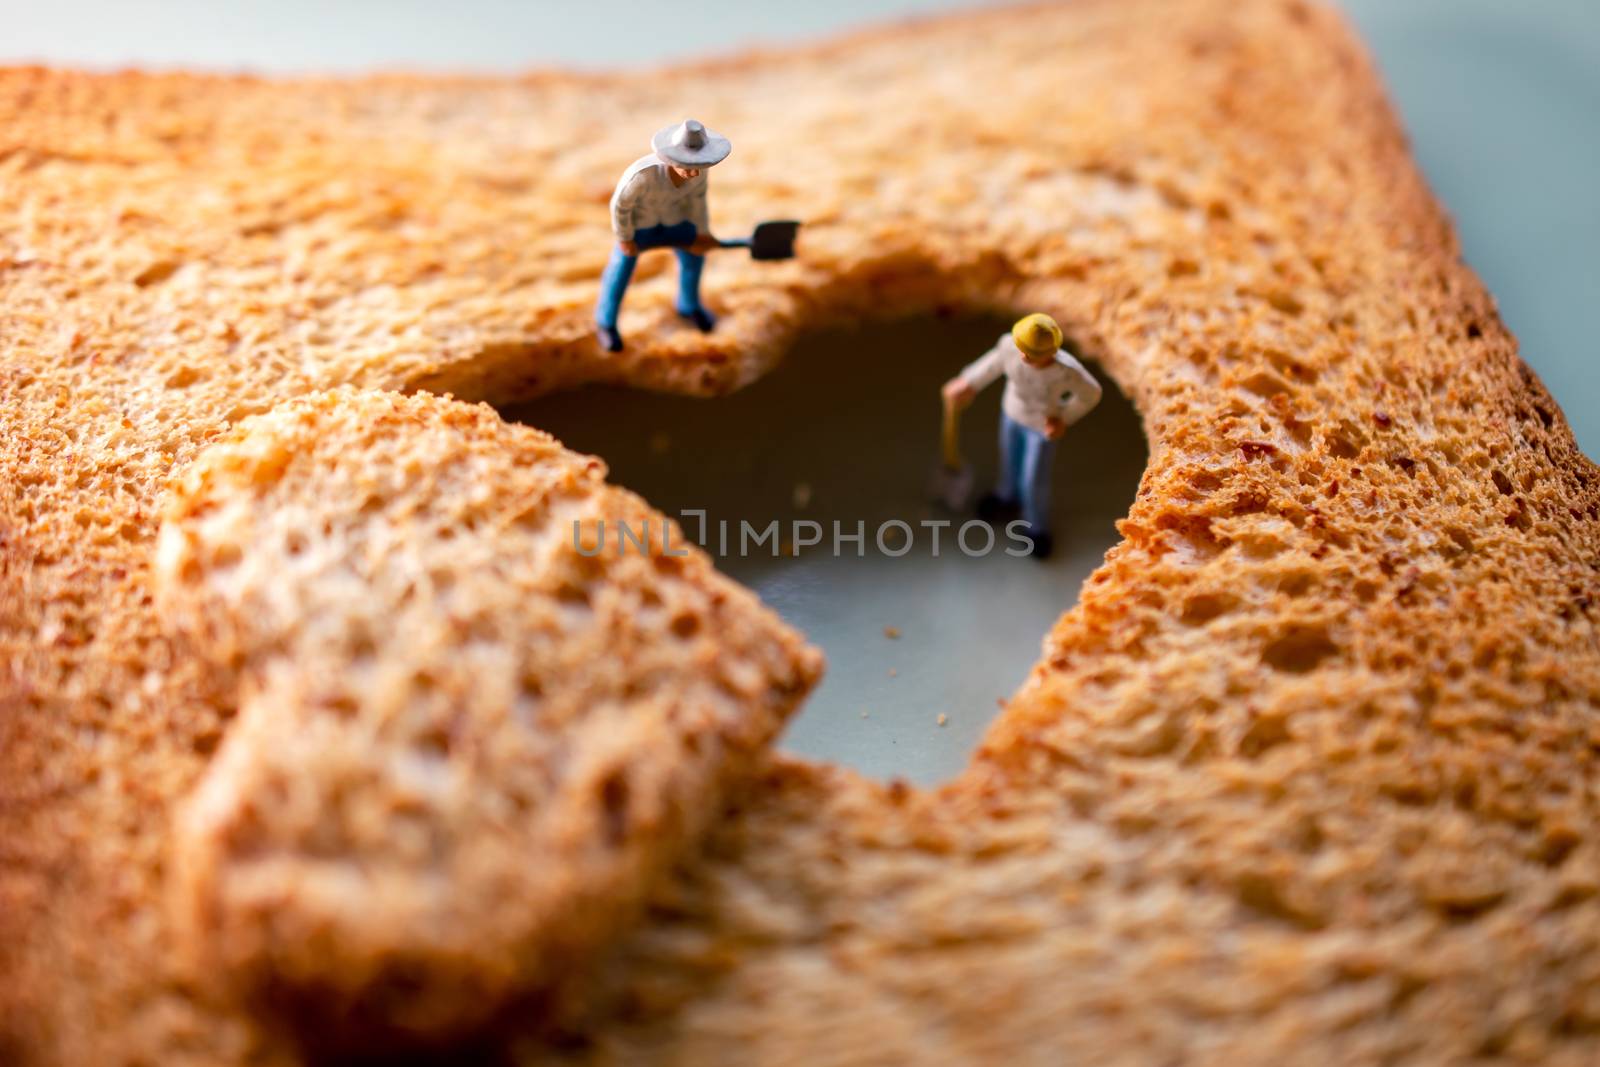 Love Concept. Sad Relationship. Group of Worker Miniature Fixing a Burned Sliced Toasted Bread with a shape of Heart